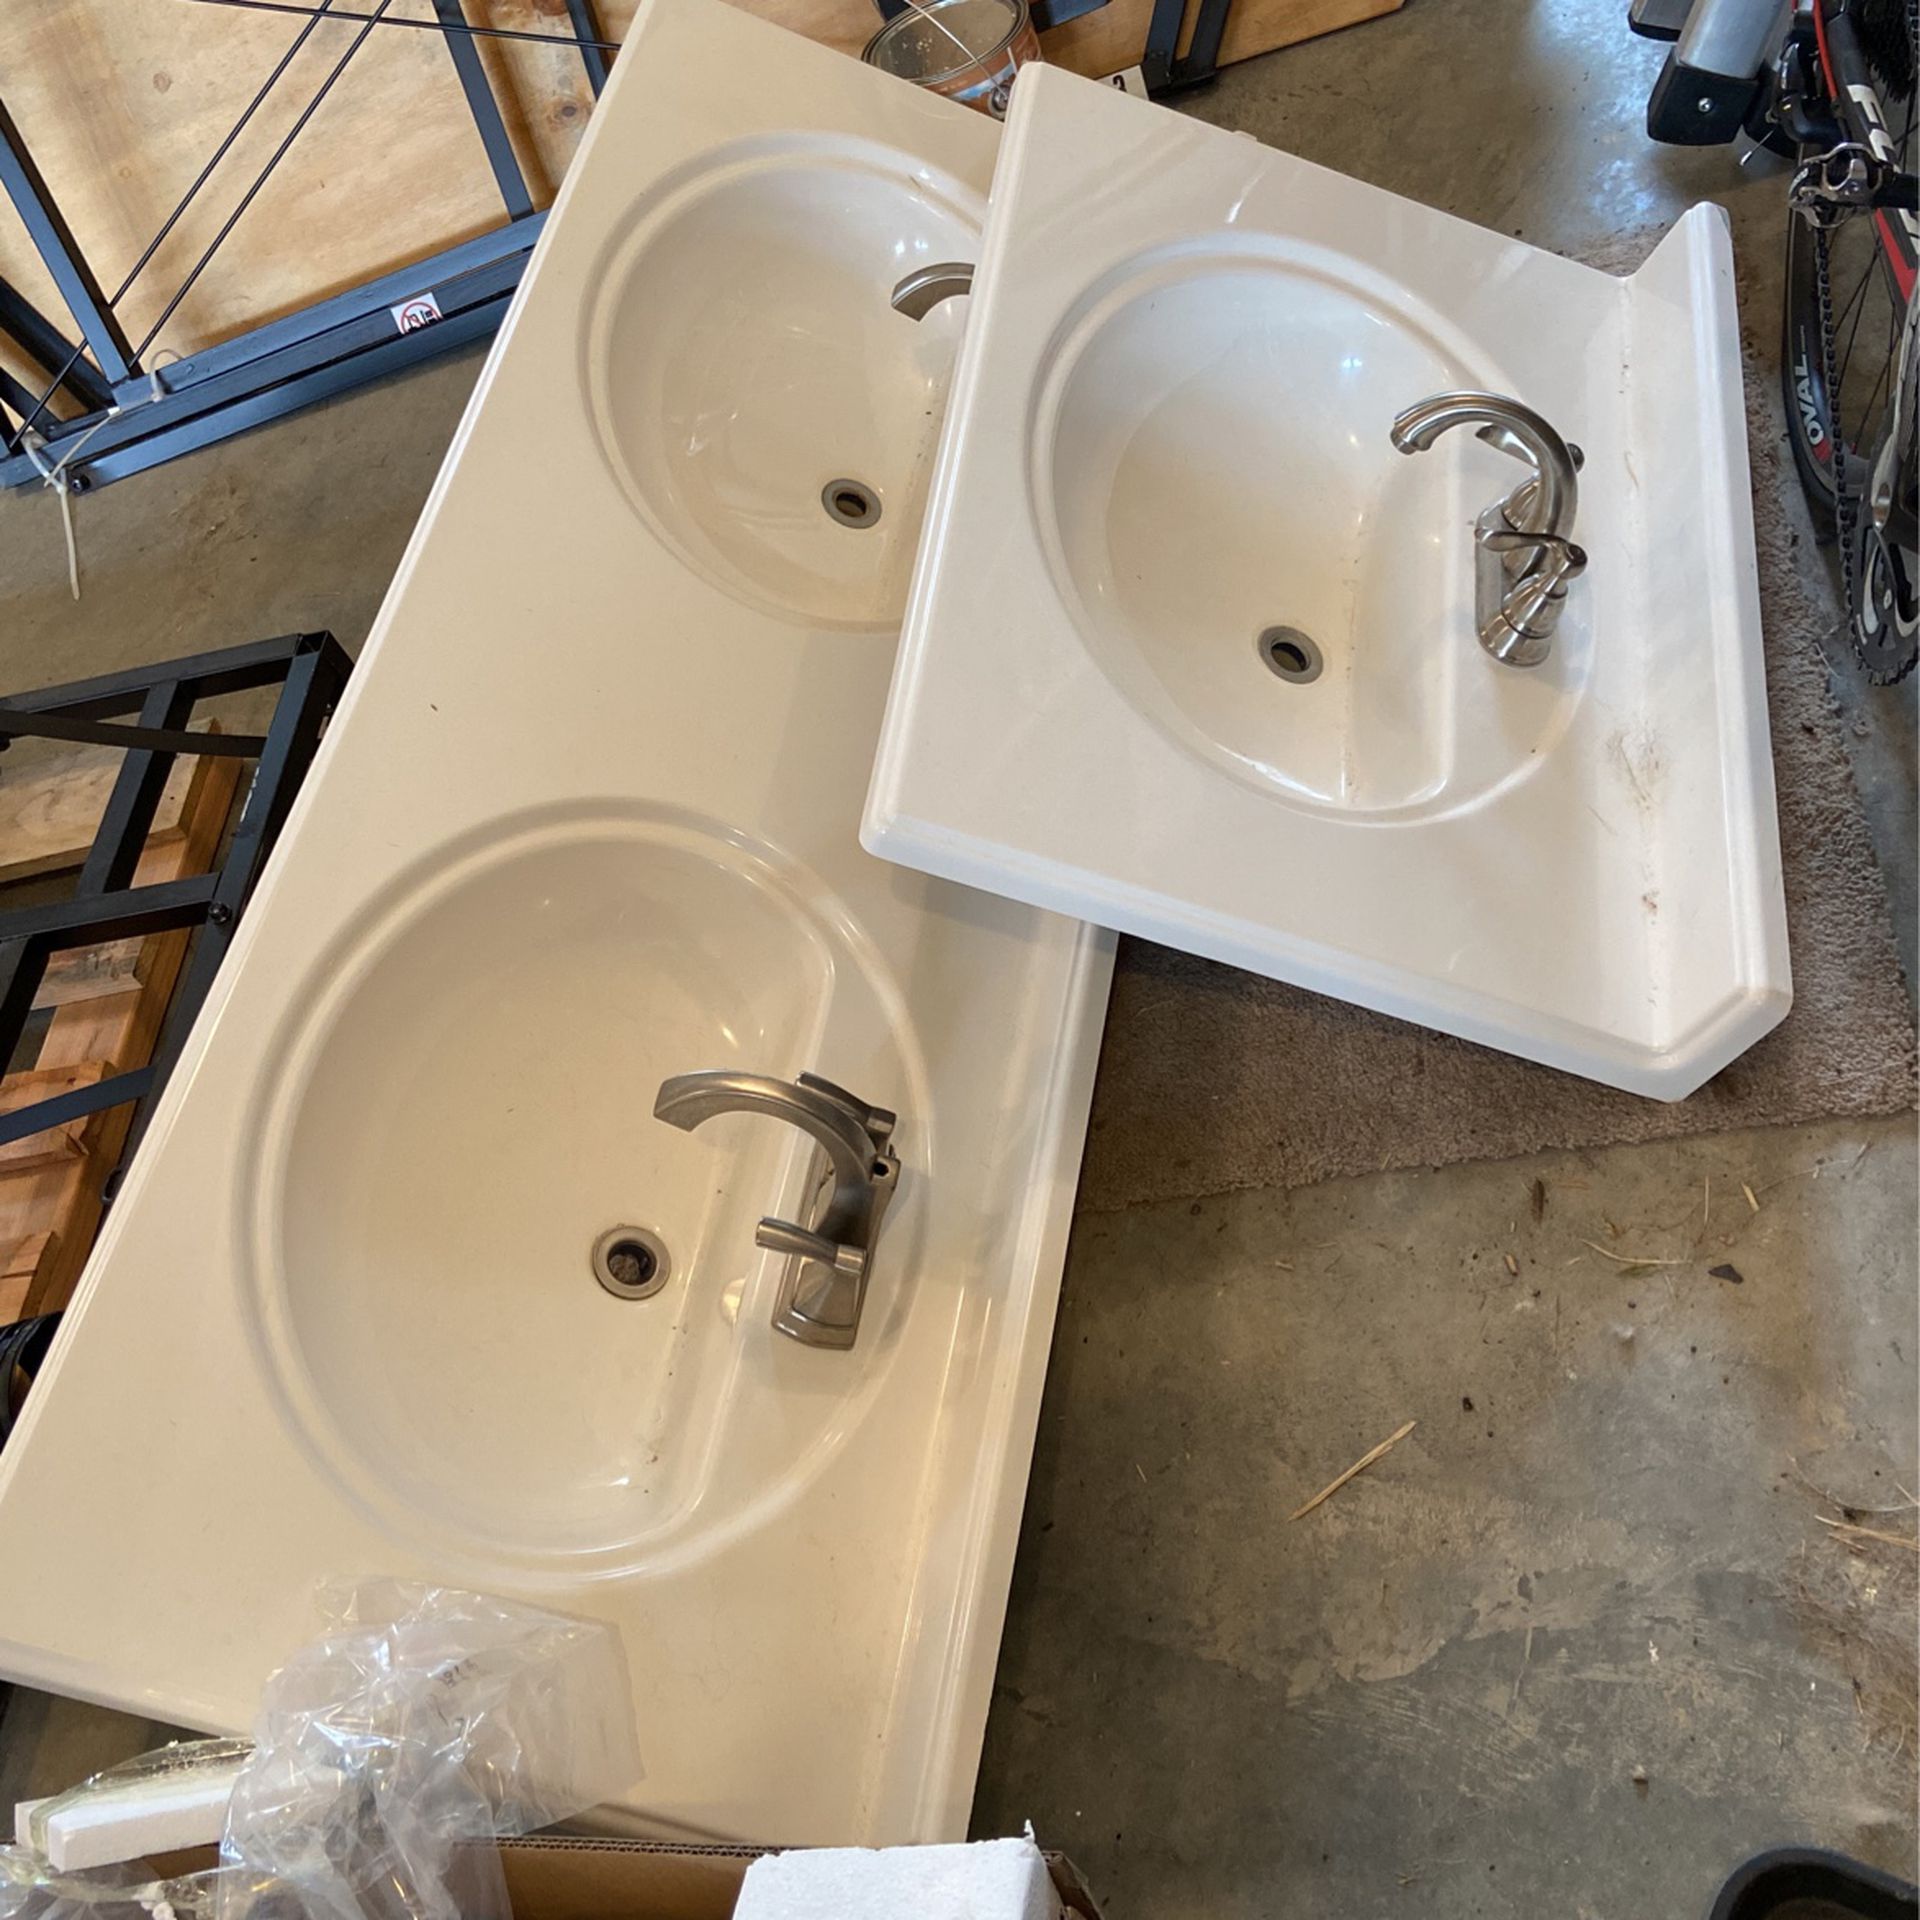 Free cultured Marble White Countertops With Fixtures 